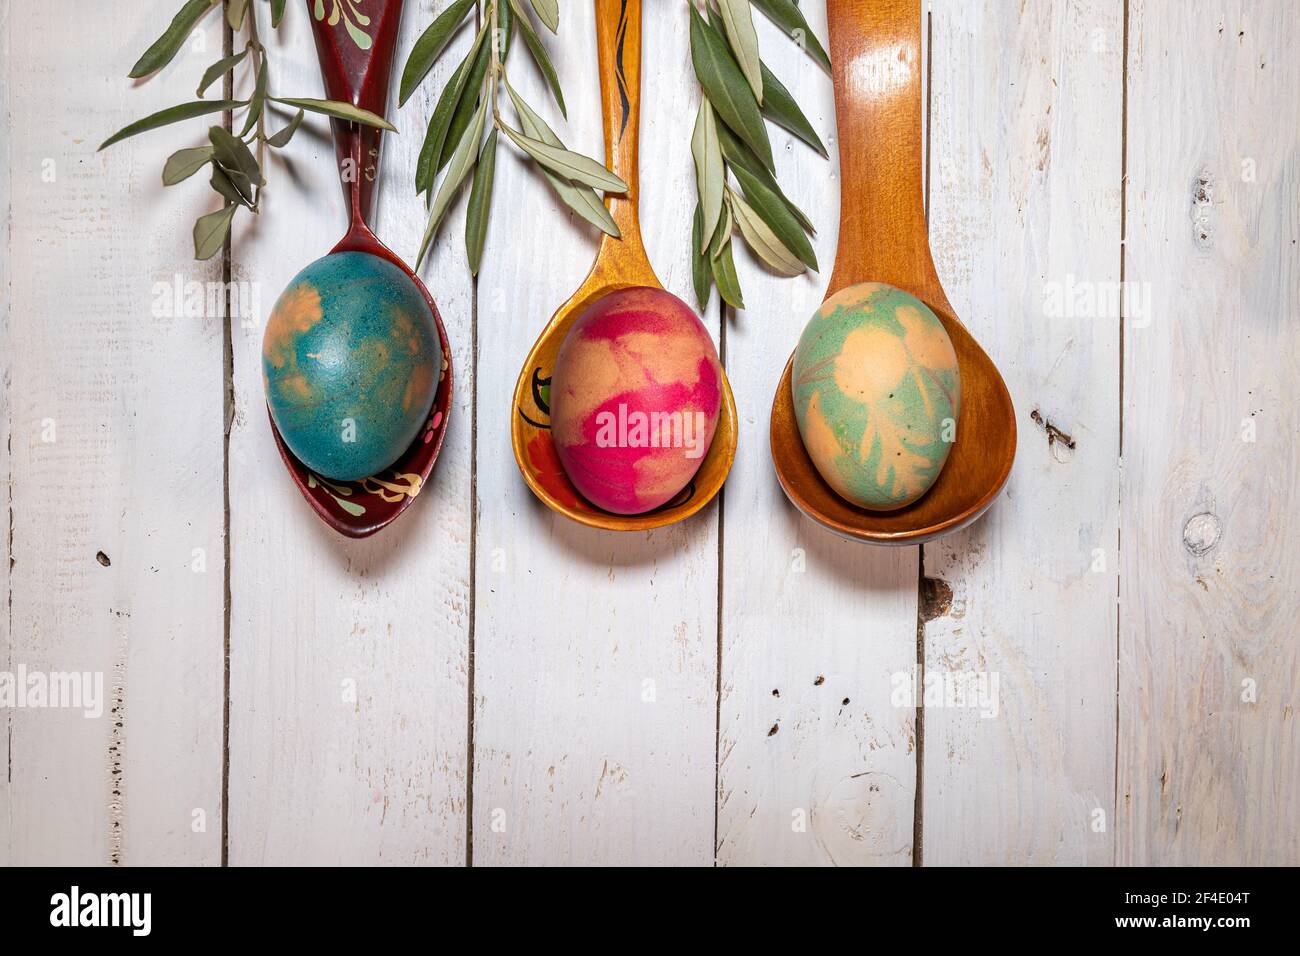 Flatlay Easter composition. Wooden spoons with coloured eggs and olive branches on a shabby chic background. Stock Photo